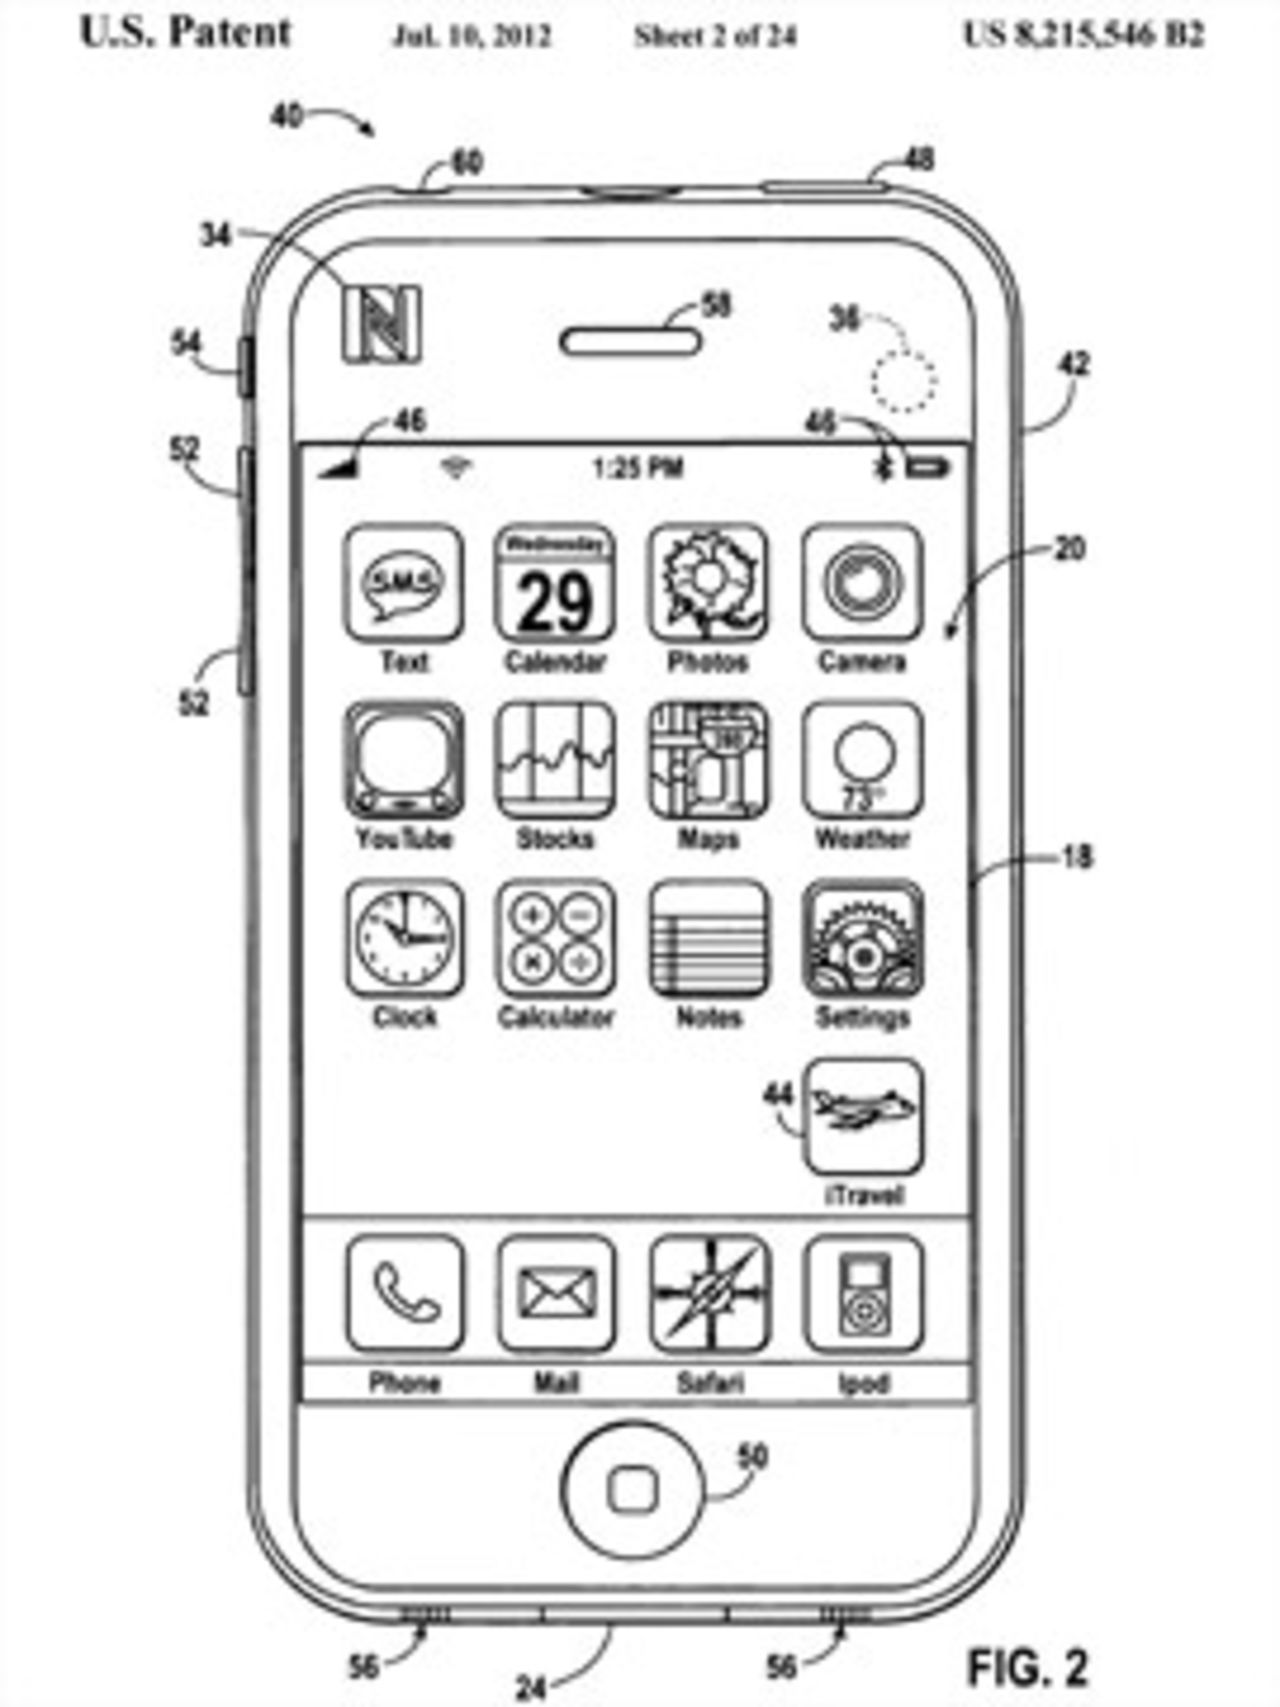 Apple's vision for its app, according to U.S. Patent and Trademark Office, shows an icon in the screen's lower right labled "iTravel."